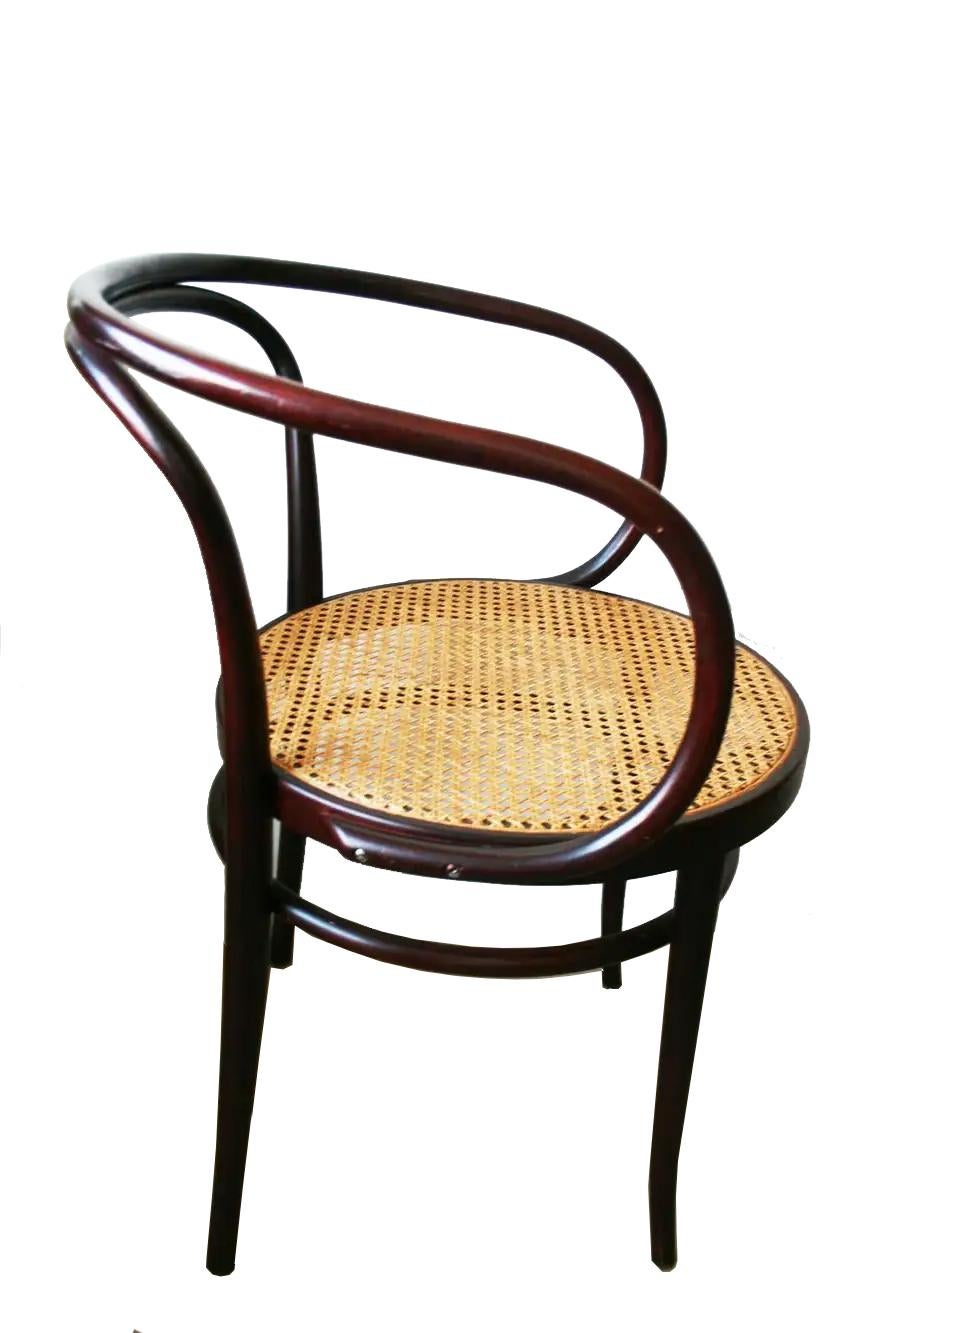 Thonet 209 , Pair of Cane and Bentwood Chairs after Thonet  13